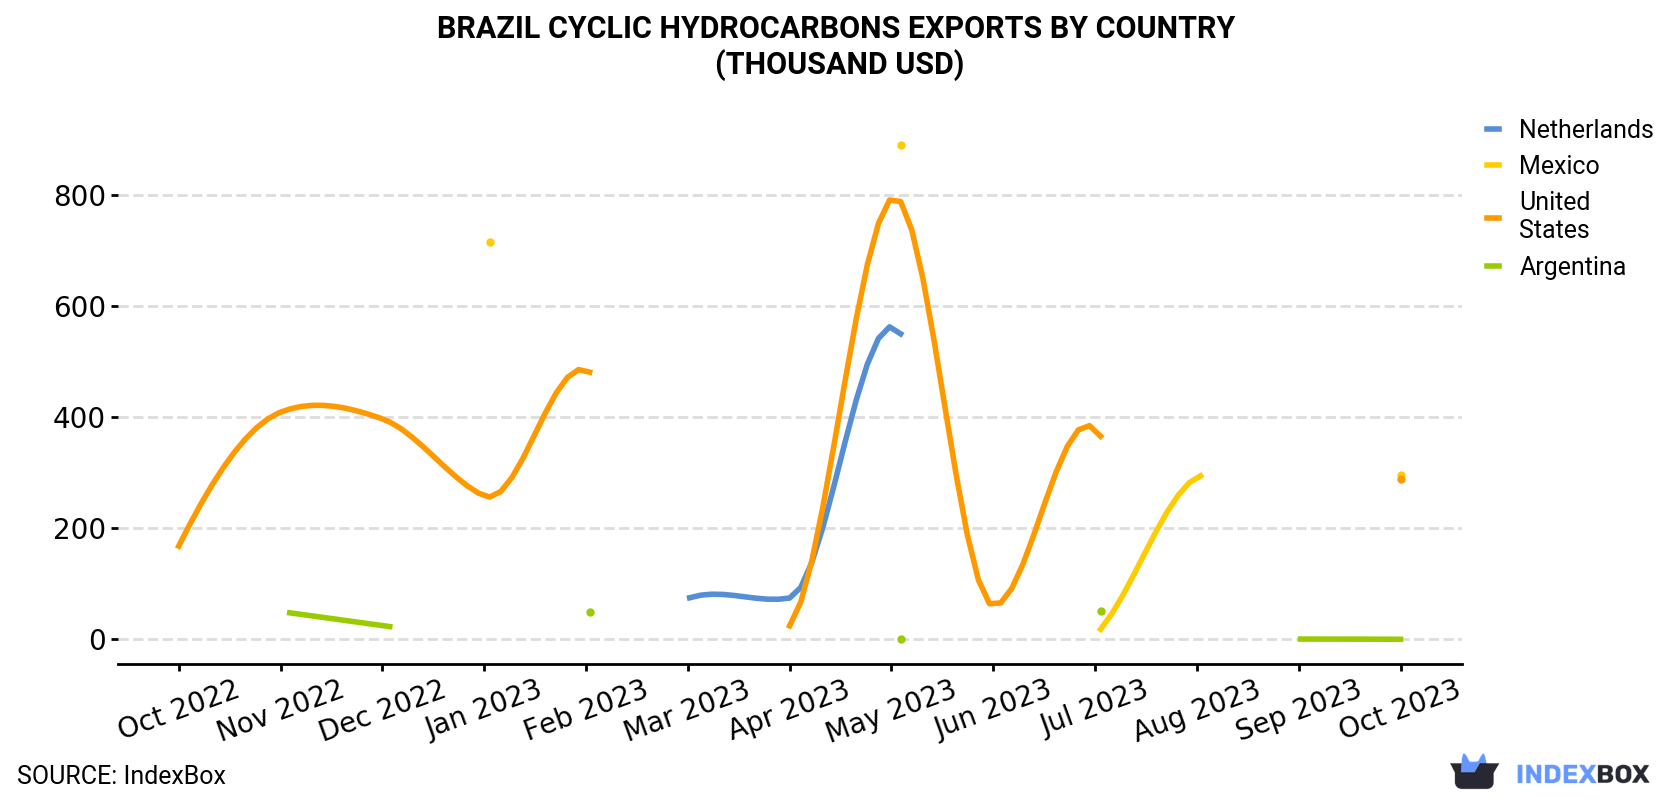 Brazil Cyclic Hydrocarbons Exports By Country (Thousand USD)